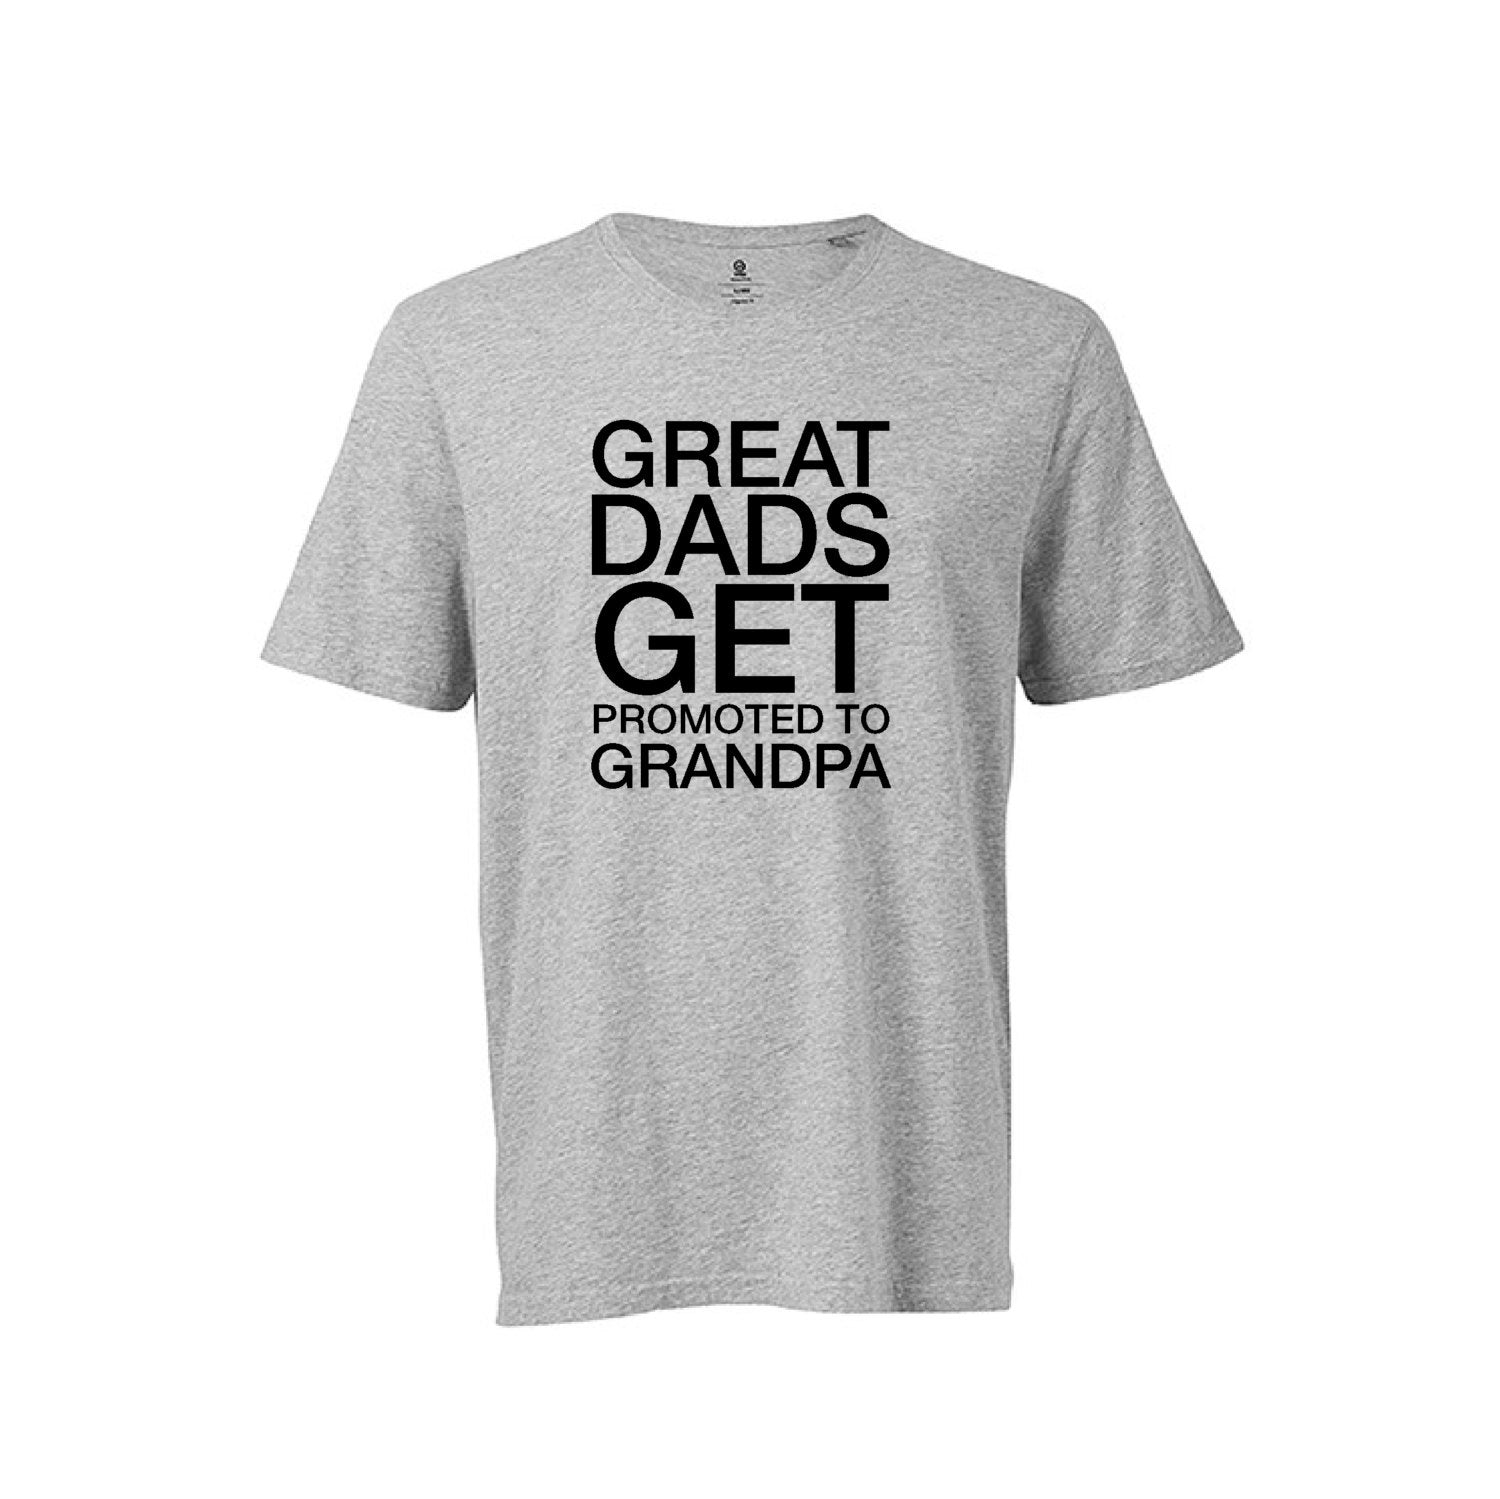 Great Dads Get Promoted To Grandpa T-Shirt For Men, Men's Shirt Gift For Pregnancy Announcement, Family Reveal, Cotton T-Shirt, M-GY-SS-T